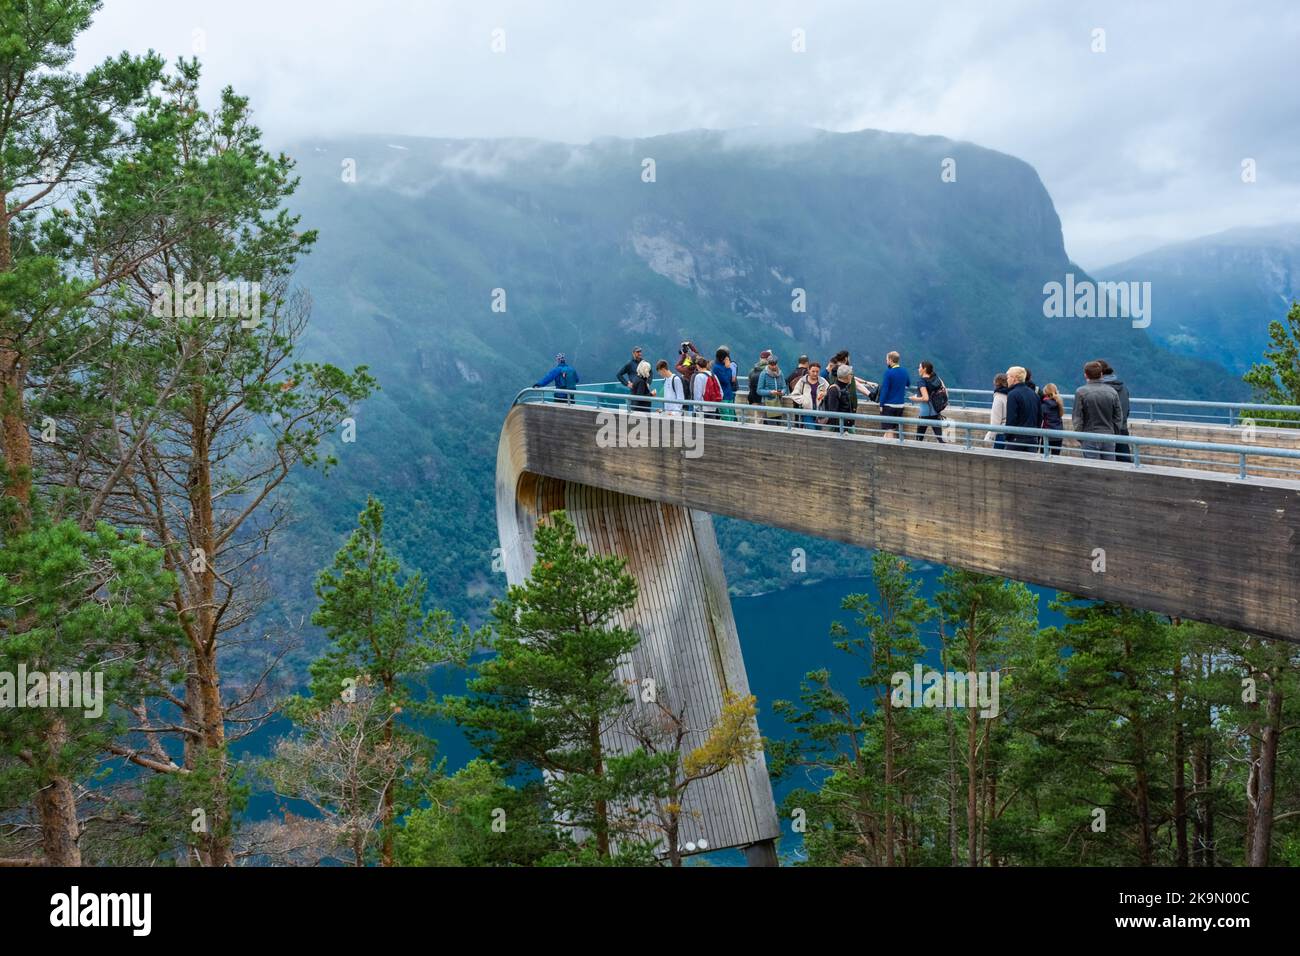 Aurland, Norway, 9 August 2022: Tourists admiring the landscape from the Impressive wooden platform for a lookout over the fjord of Aurland in Stegast Stock Photo